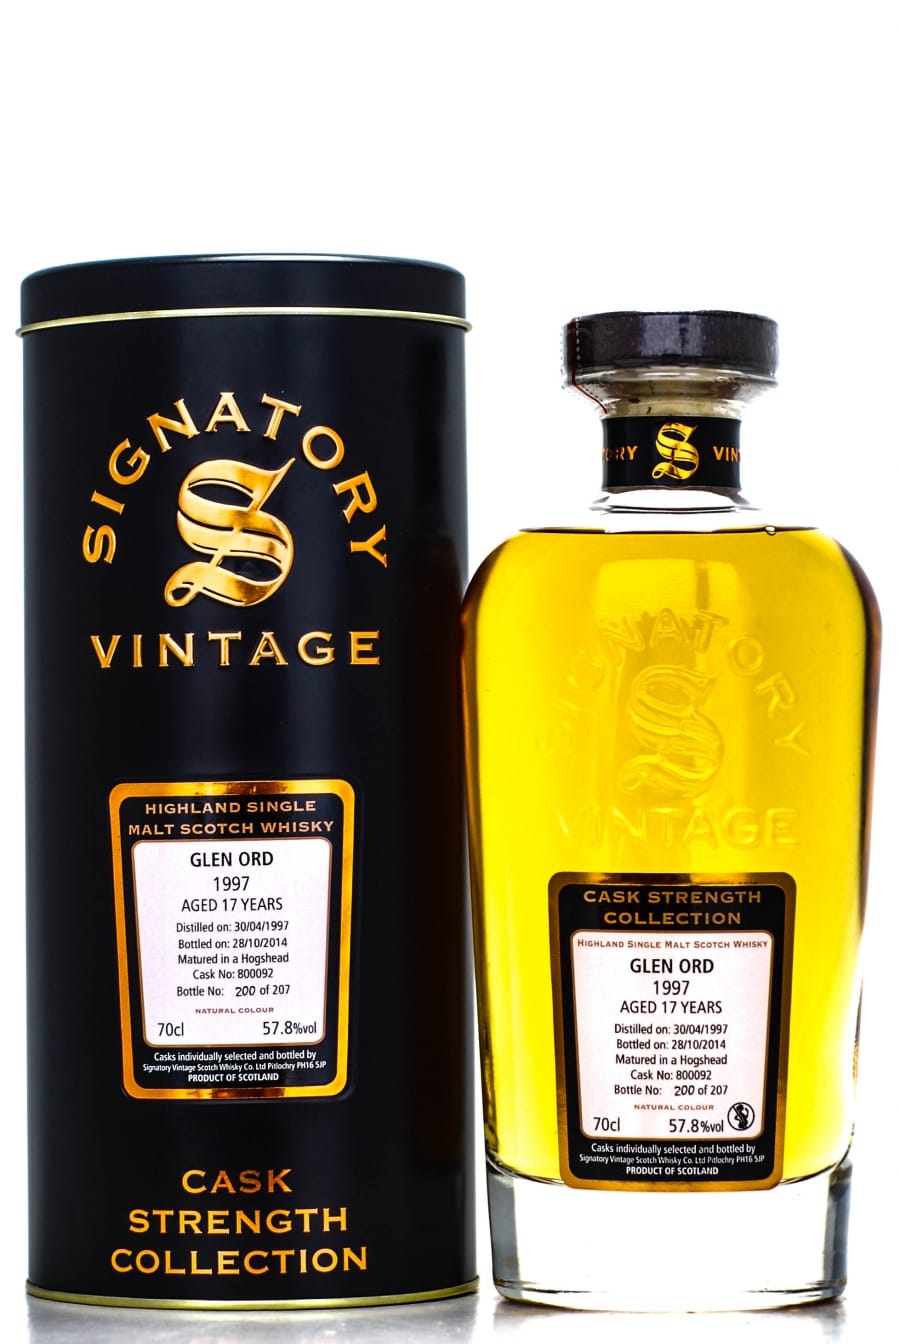 Glen Ord - Glen Ord 17 Years Old Signatory Vintage Cask Strength Collection Cask: 800092 1 Of 207 Bottles 57.8% 1997 In Original Container